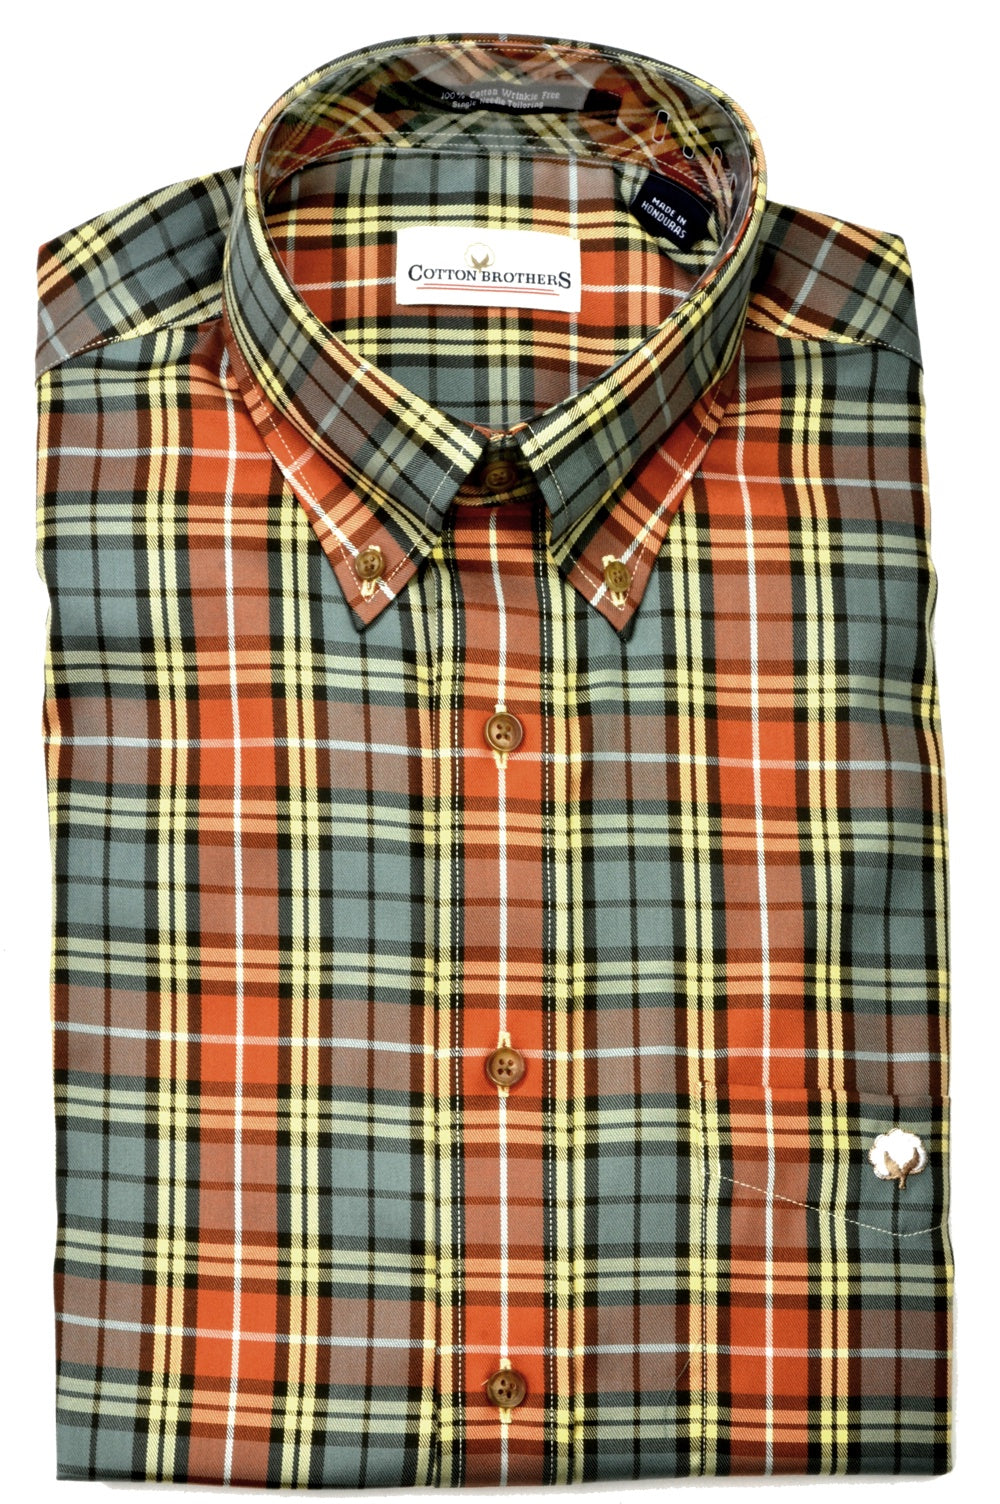 Cotton Brothers Men's LS BD Woven Sport Shirt/Multi #808613-97 - Andy ...